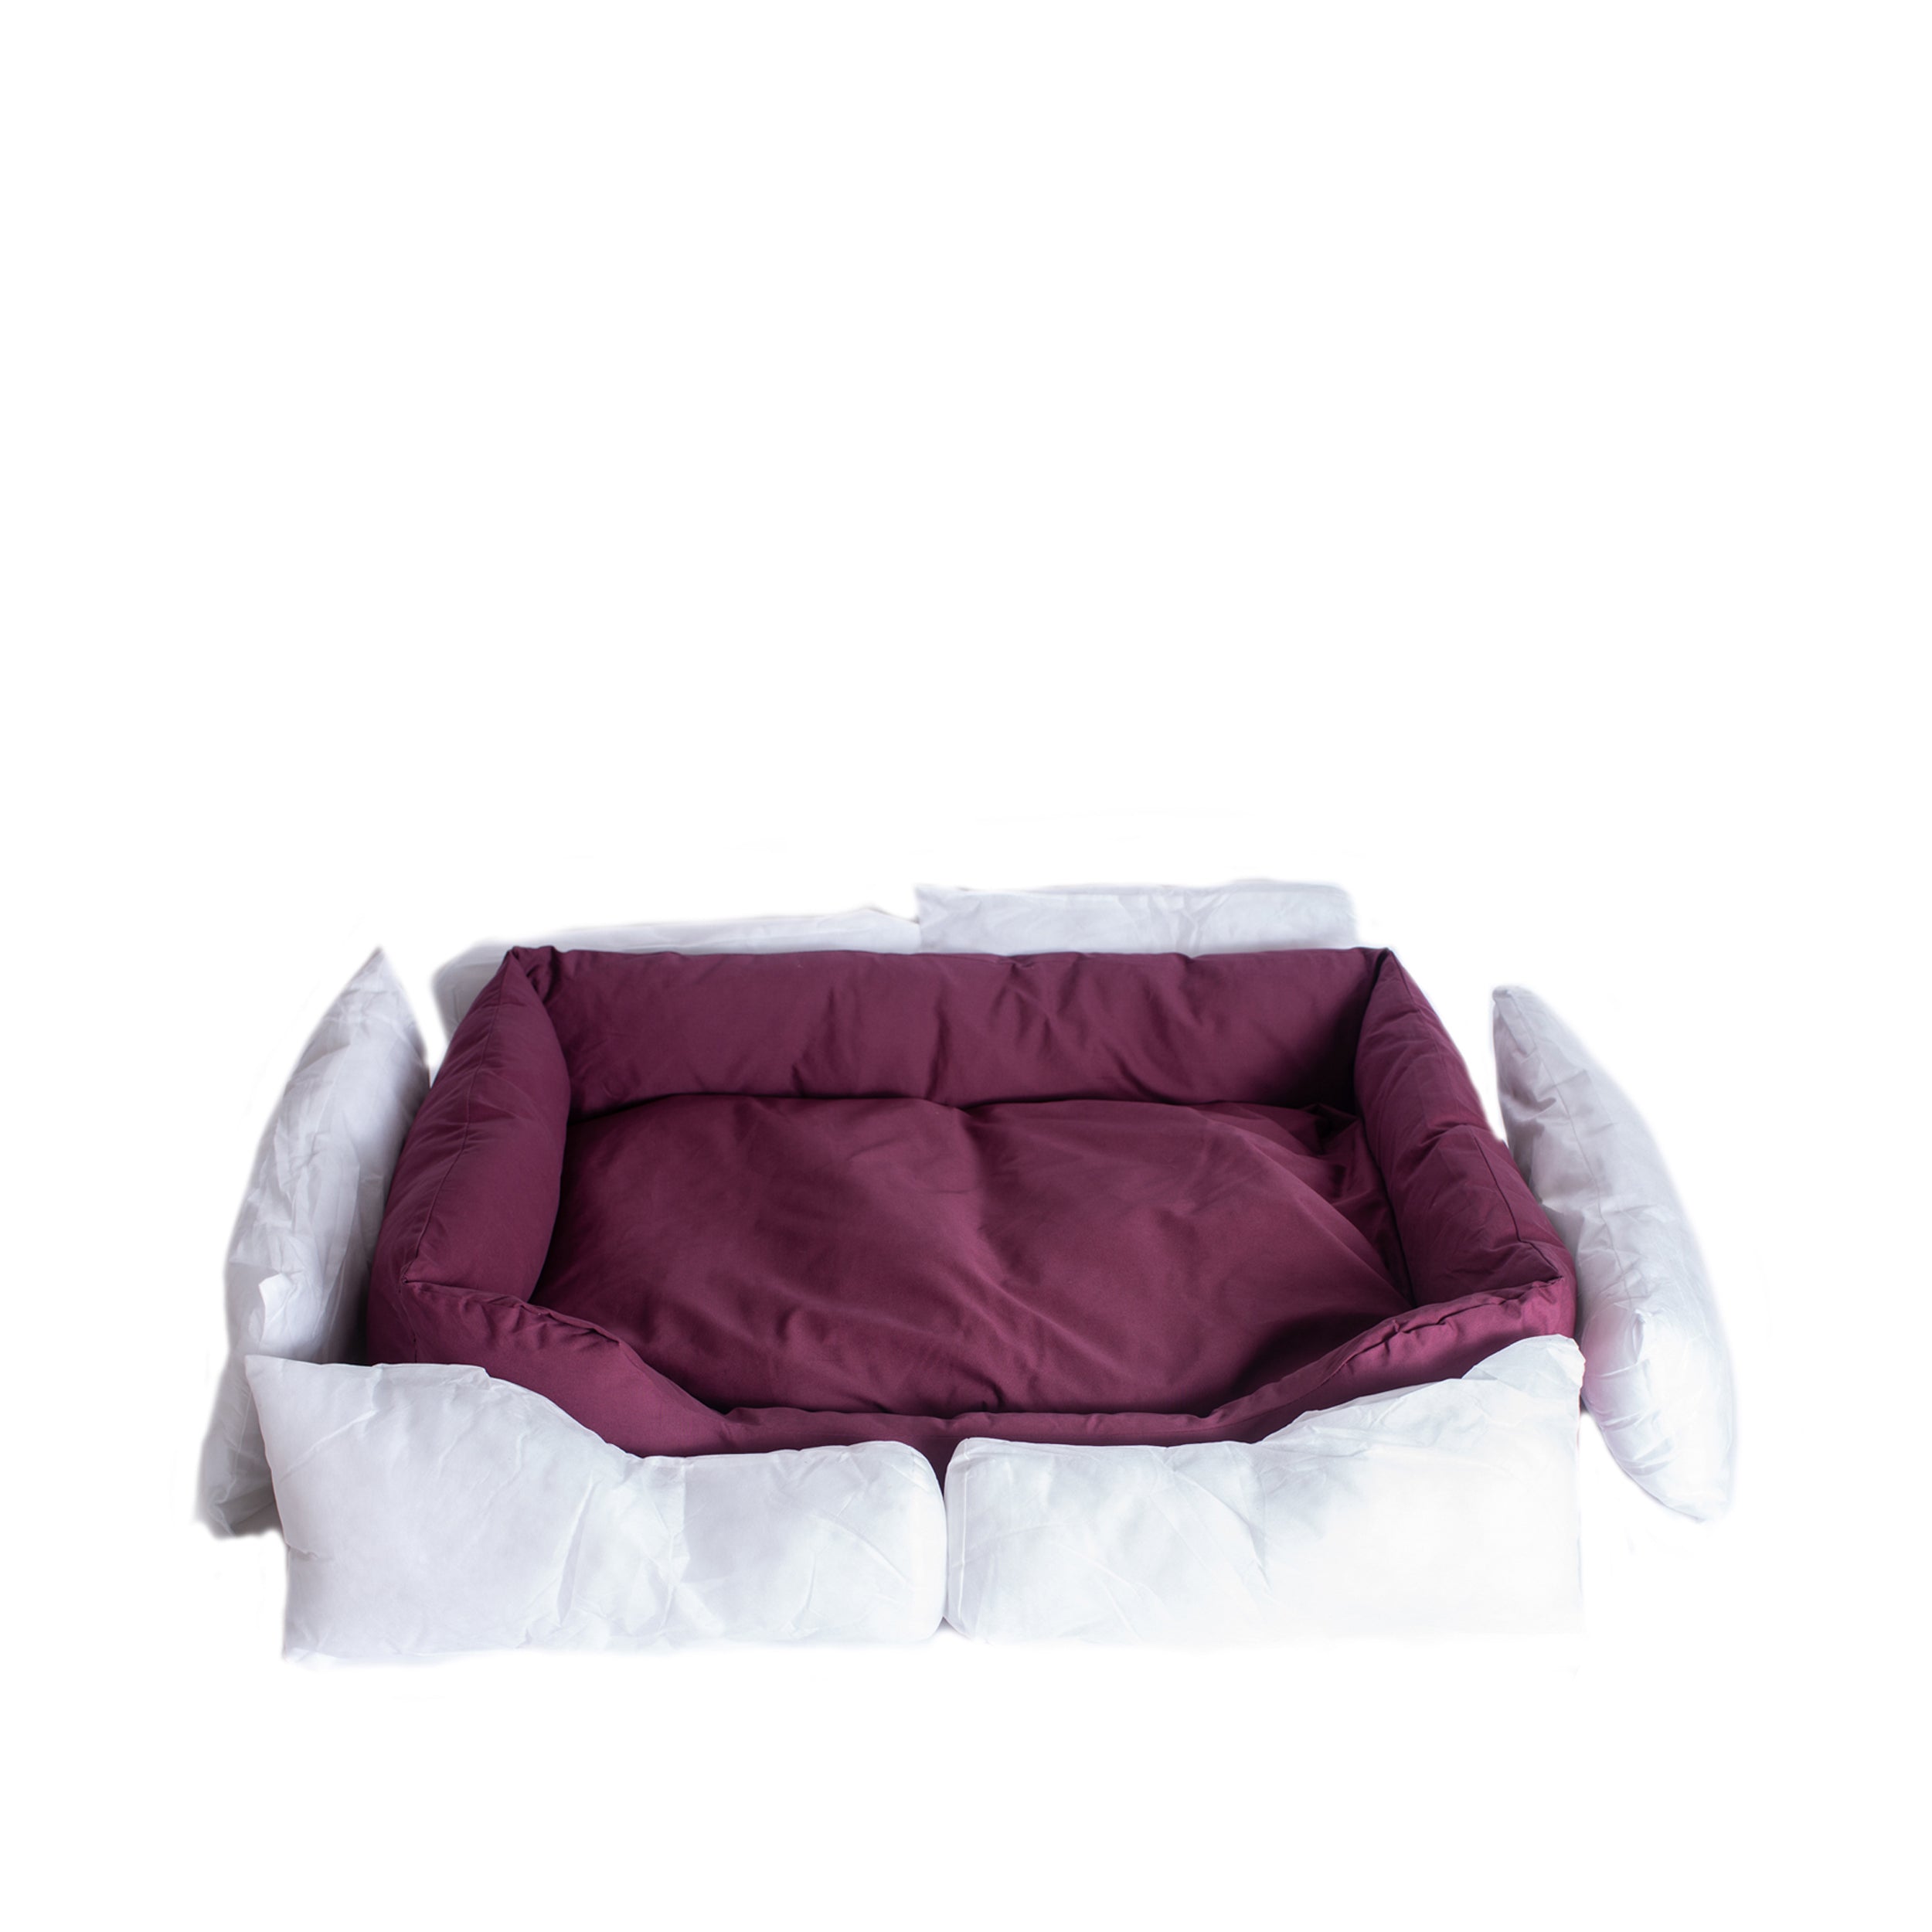 Armarkat Pet Bed 41-Inch by 30-Inch D01FJH-Large， Burgundy